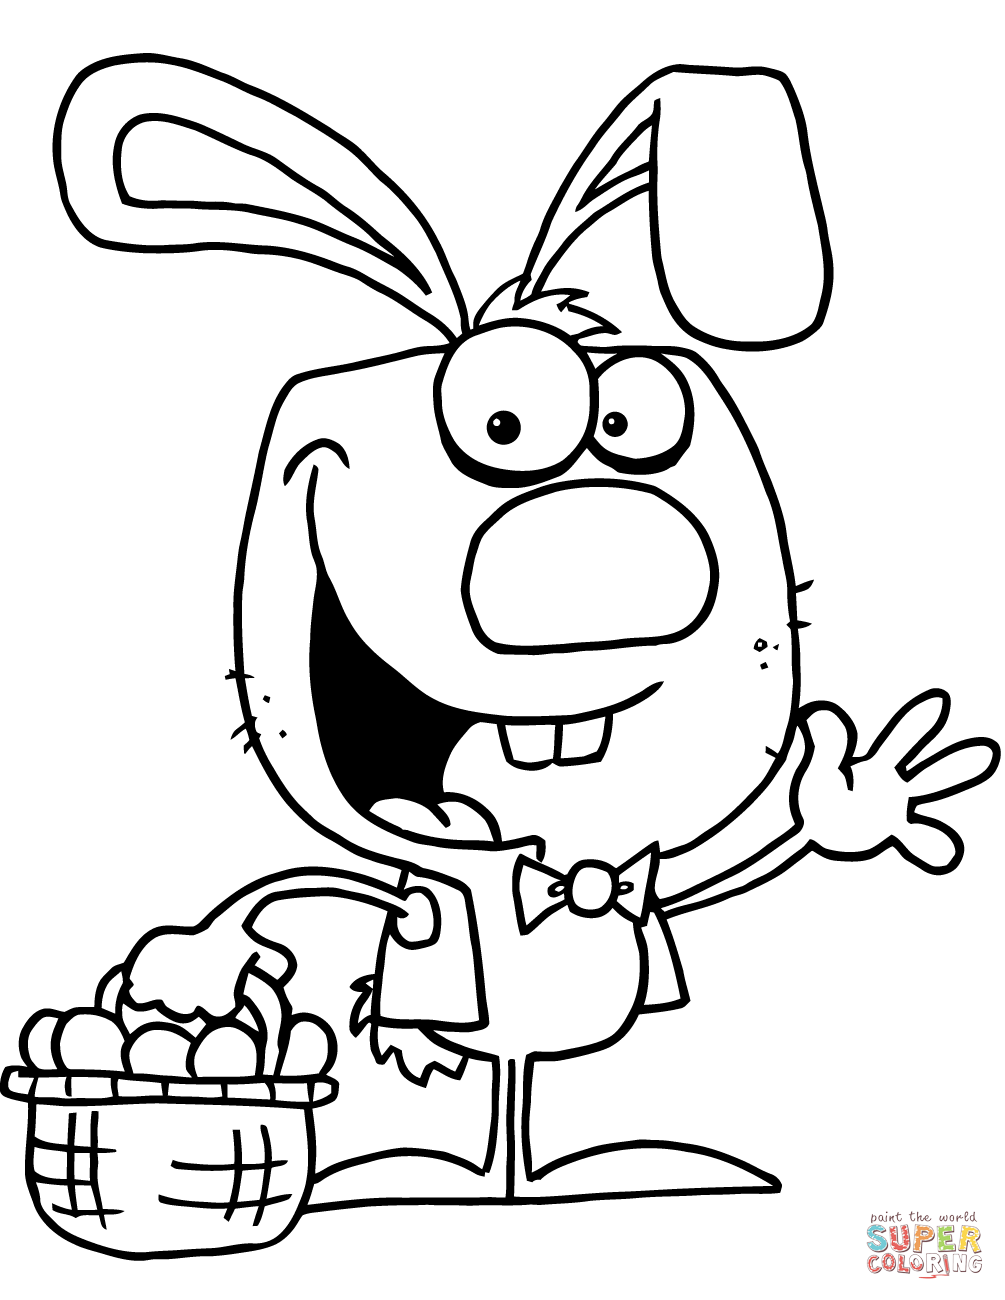 Bunny Head Coloring Pages at GetDrawings | Free download